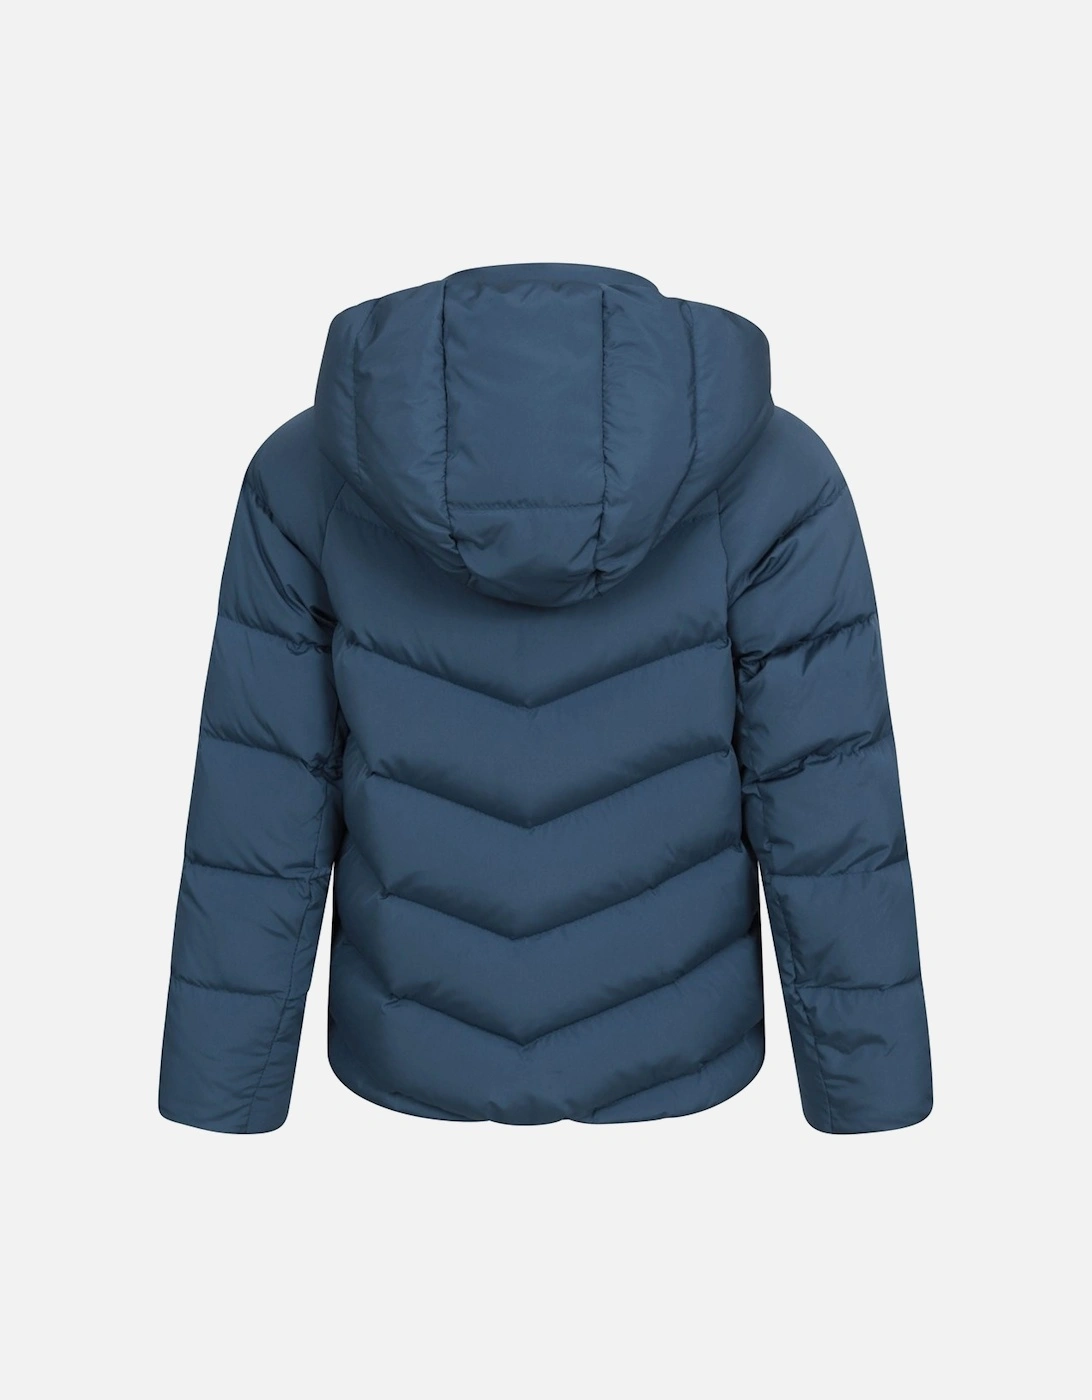 Childrens/Kids Chill Down Padded Jacket